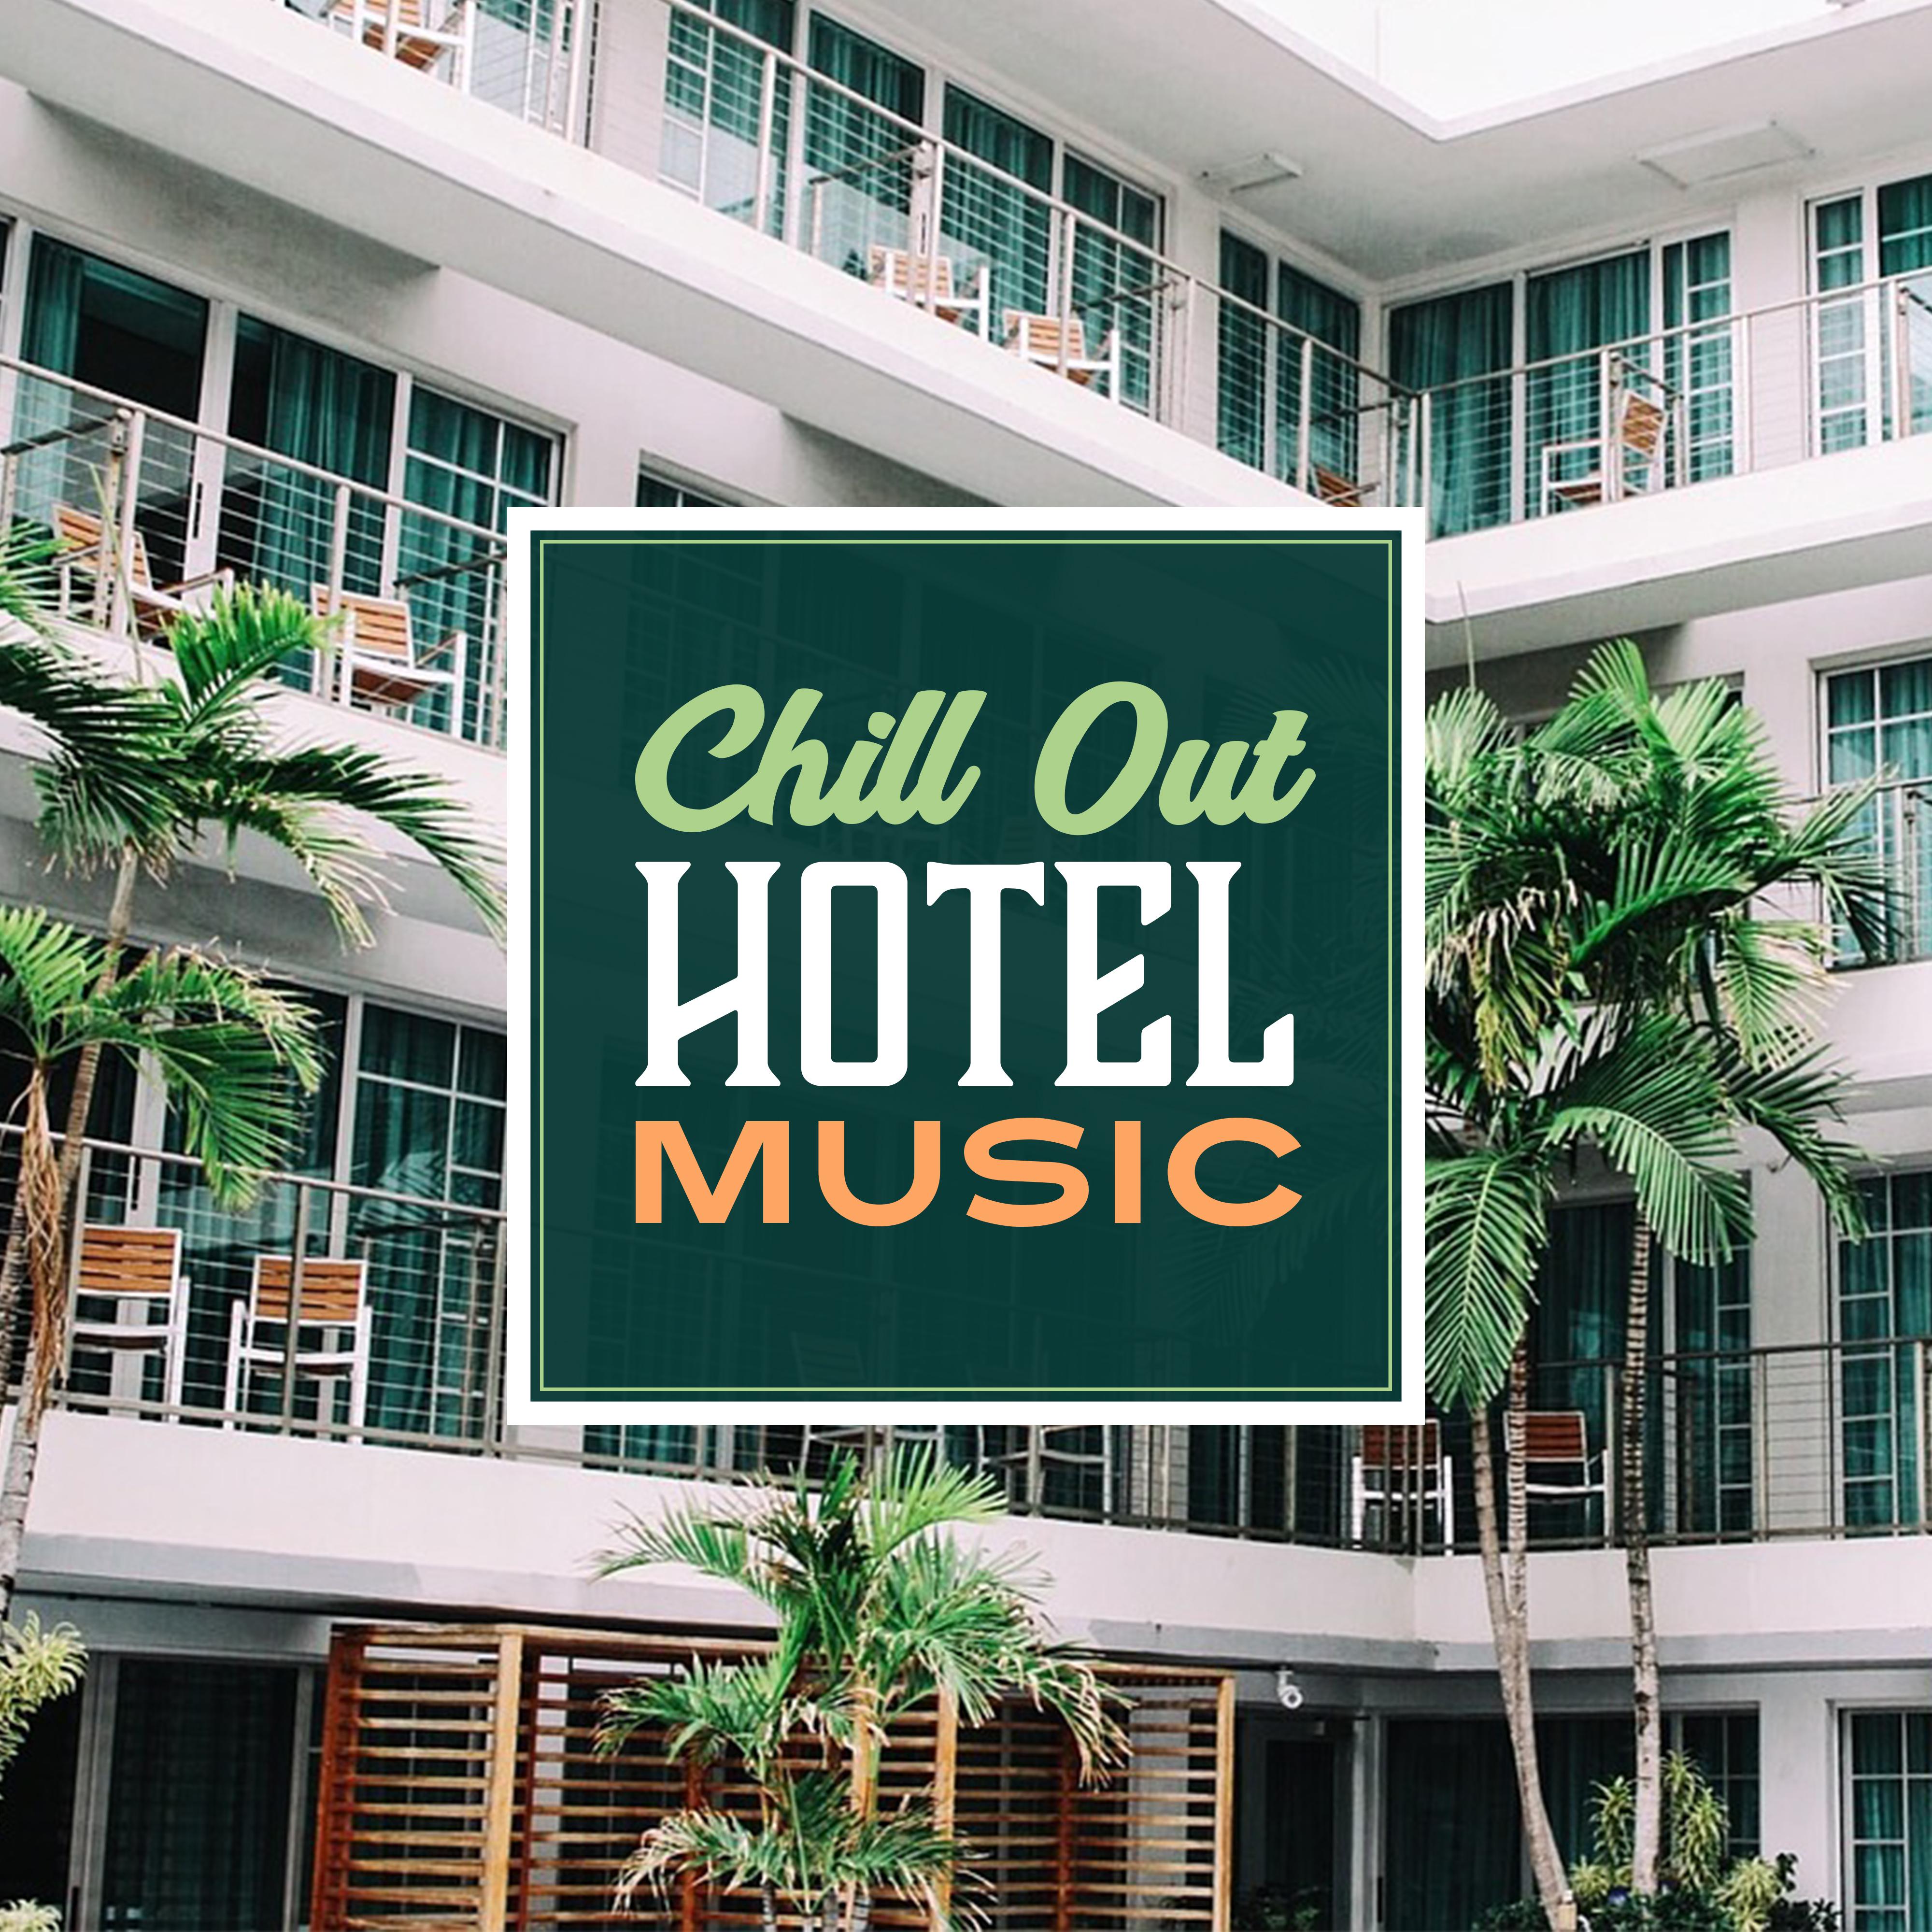 Chill Out Hotel Music – Soft Sounds for Hotel Relaxation, Inner Calmness, Peaceful Melodies